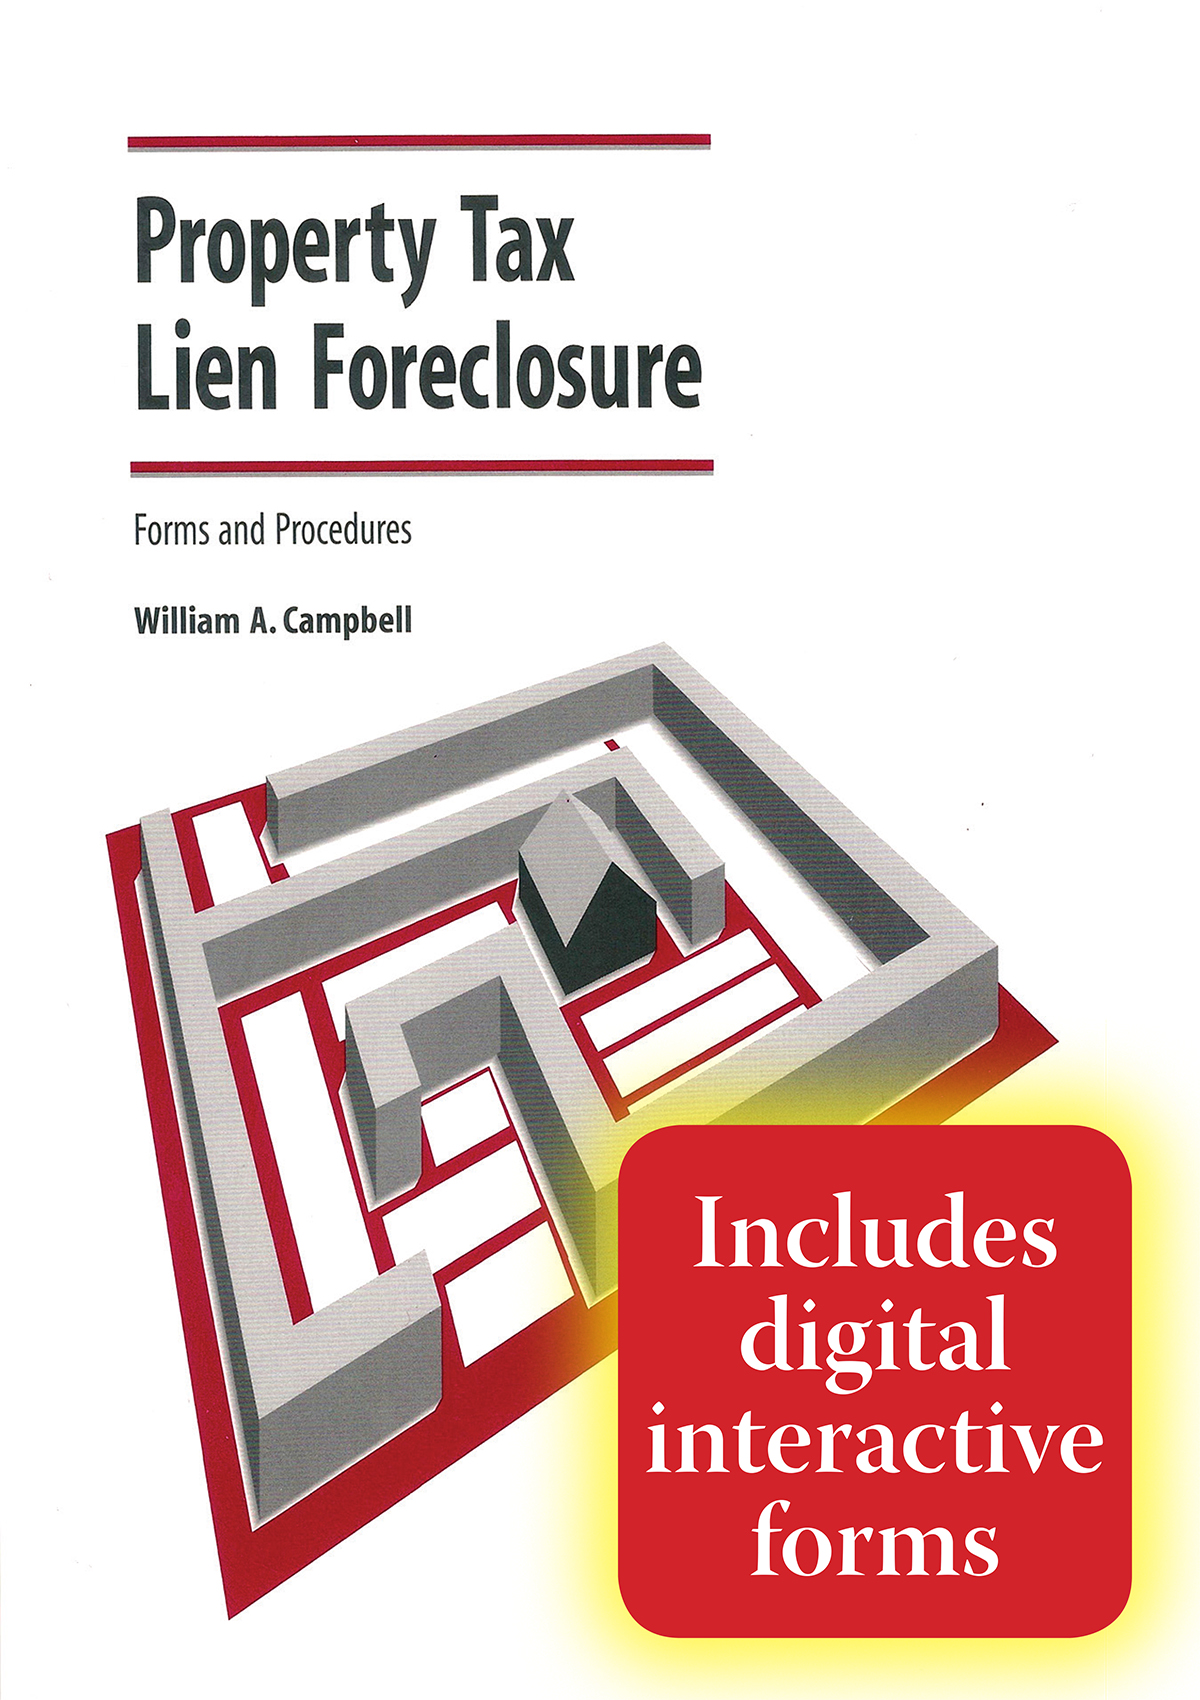 Property Tax Lien Foreclosure Forms and Procedures, Sixth Edition, 2003, with Digital Forms